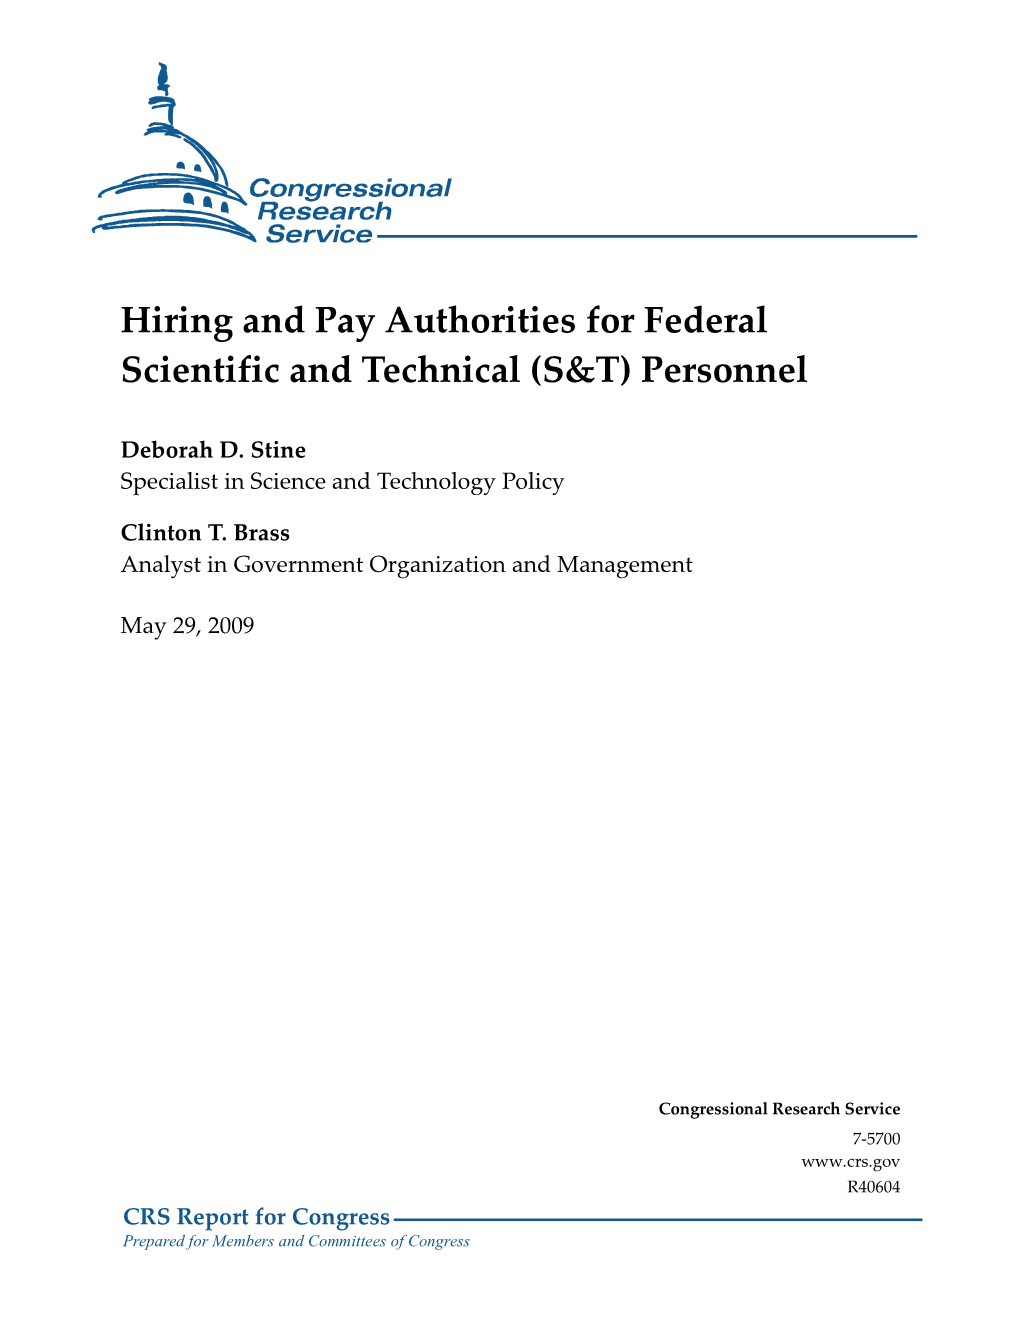 Hiring and Pay Authorities for Federal Scientific and Technical (S&T) Personnel